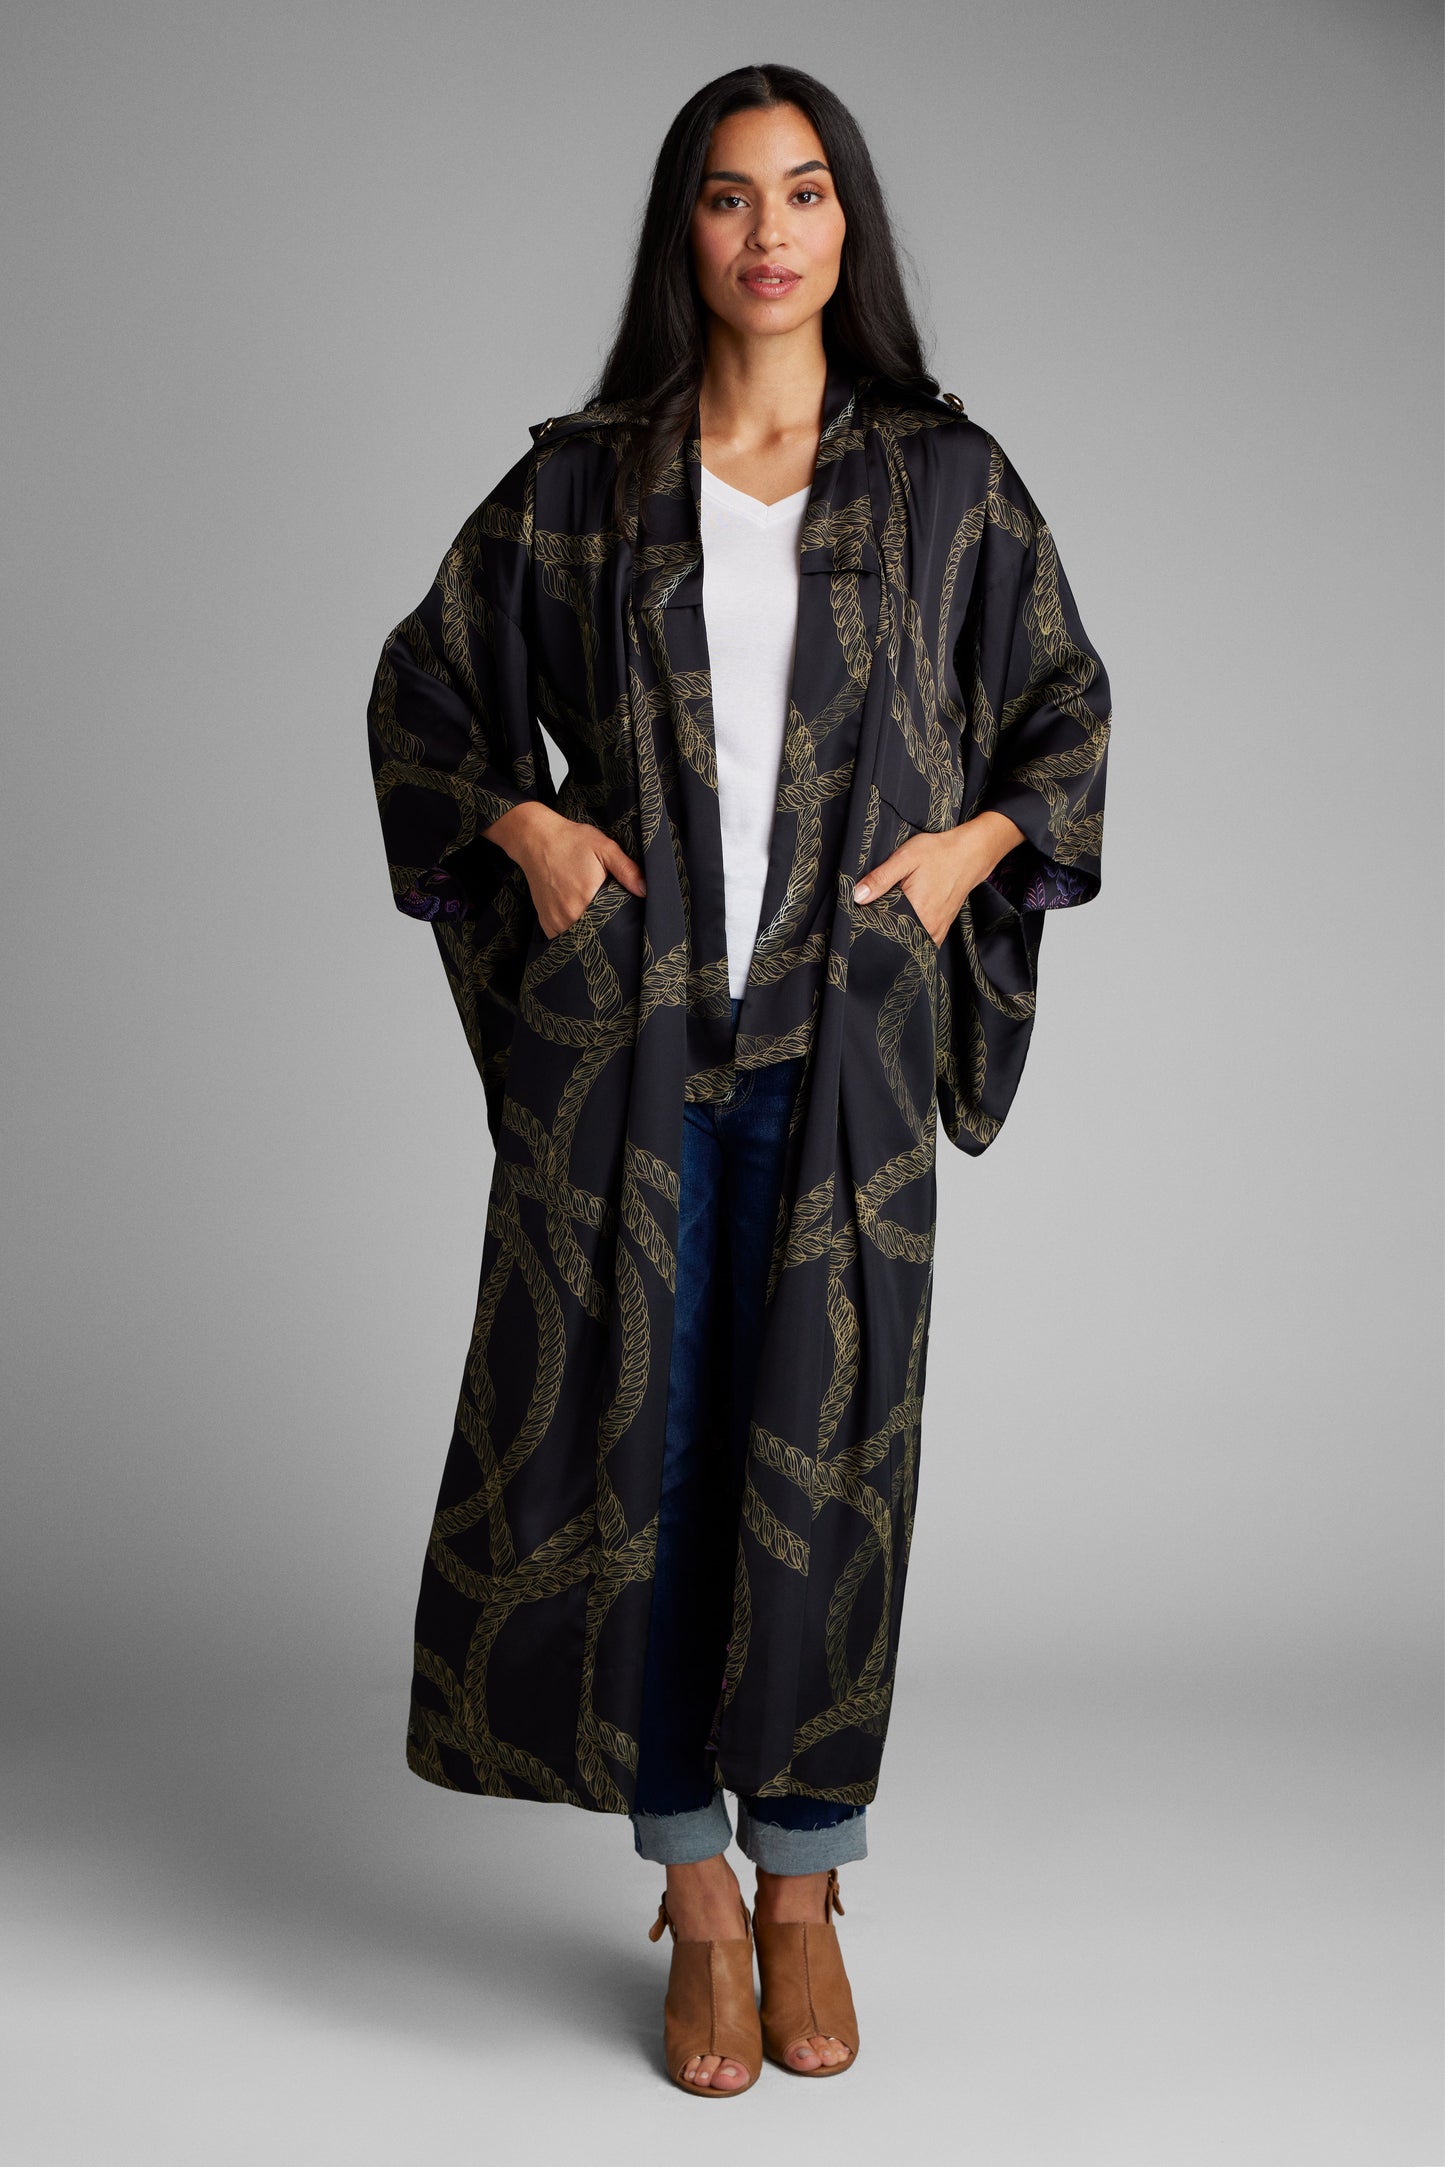 Woman with her hands in her pockets wearing a black and gold chain printed kimono duster made from recycled materials